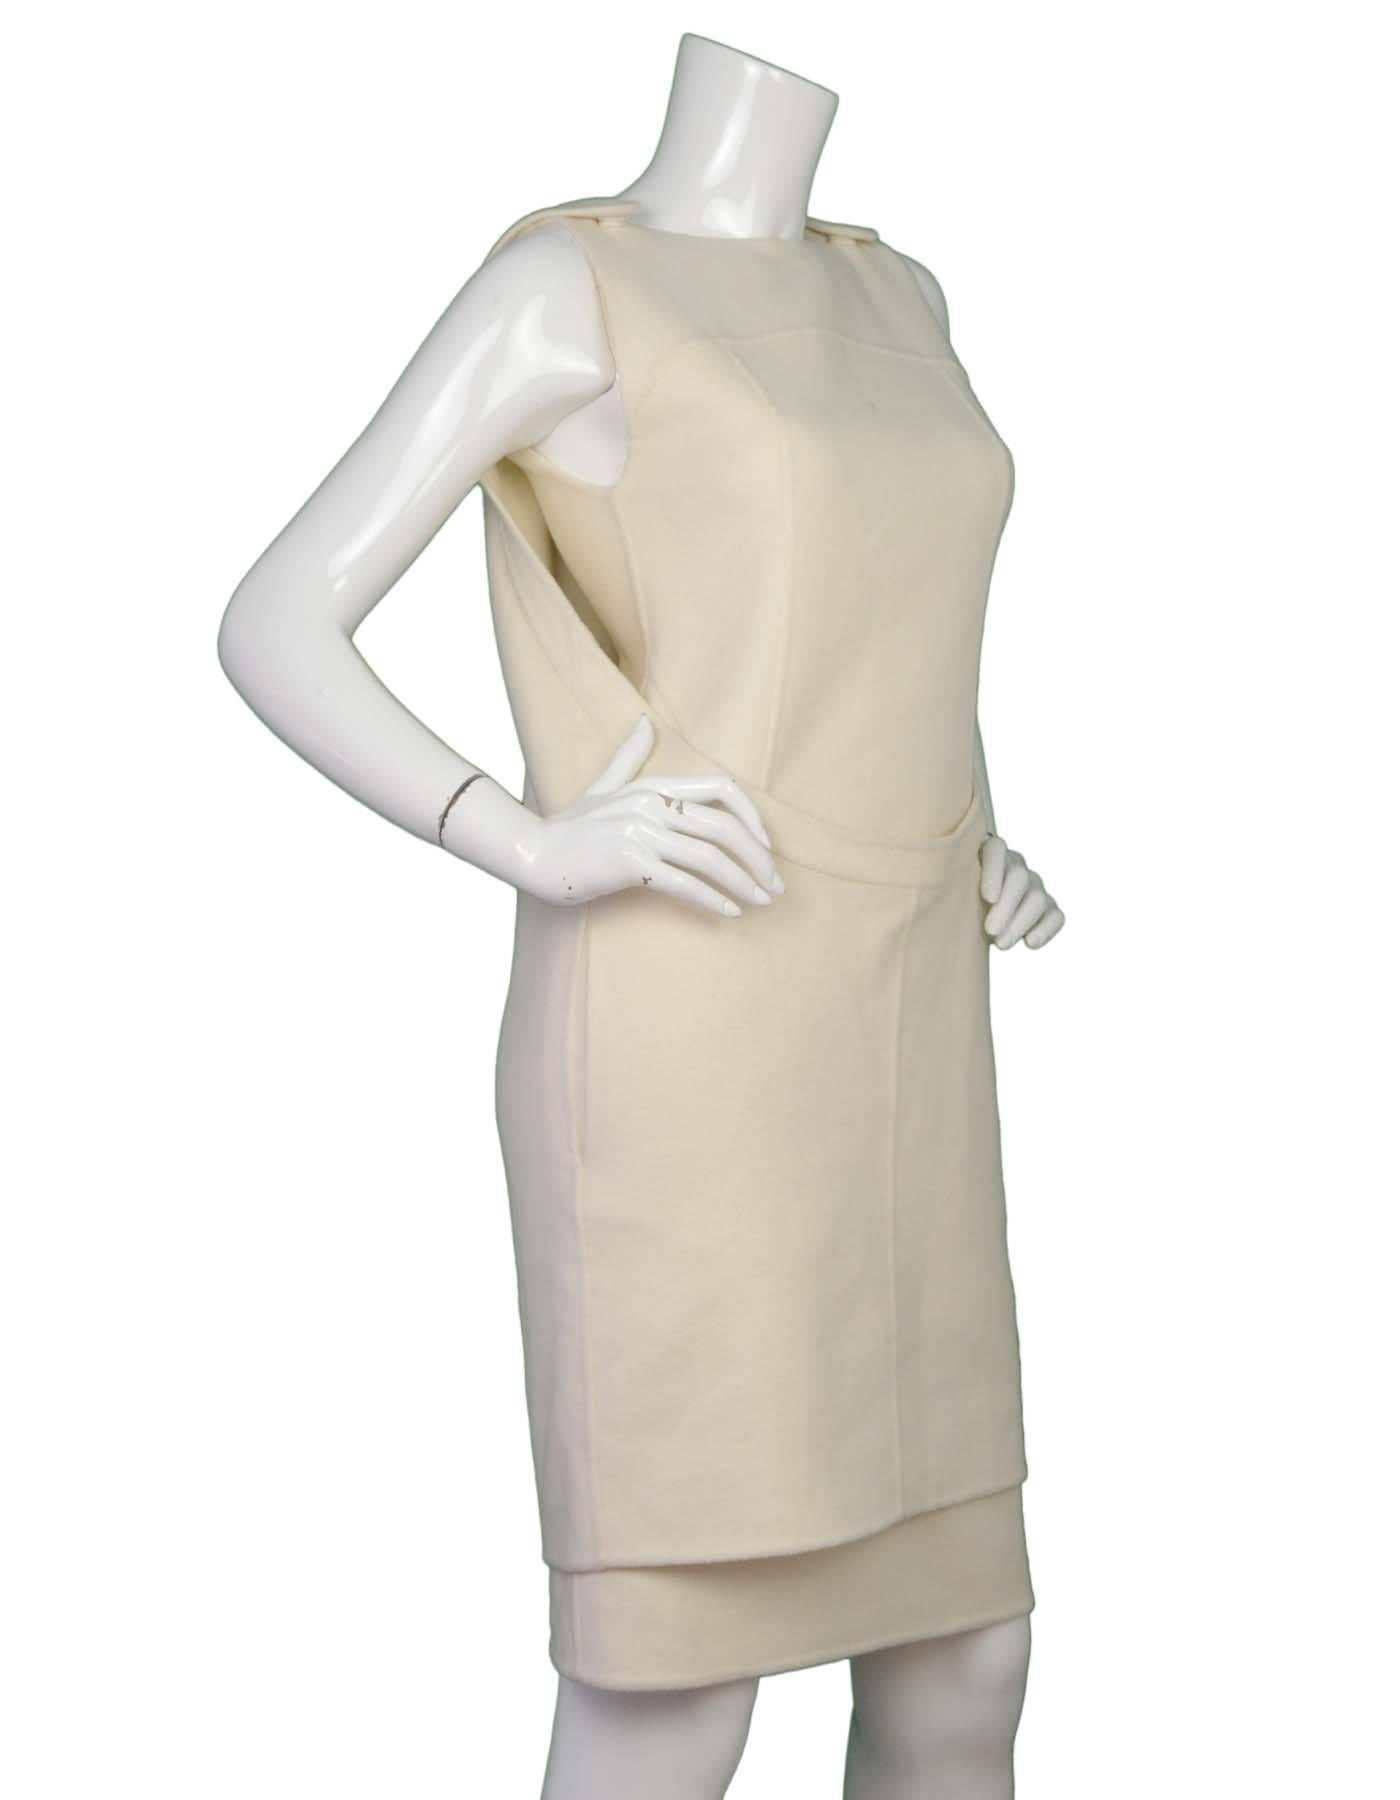 Fendi Cream Cashmere Sleeveless Shift Dress 
Features shell over layer with snaps at shoulders
Made In: Italy
Year of Production: 2014
Color: Cream
Composition: 100% cashmere
Lining: Cream, 100% silk 
Closure/Opening: Top layer- shoulder